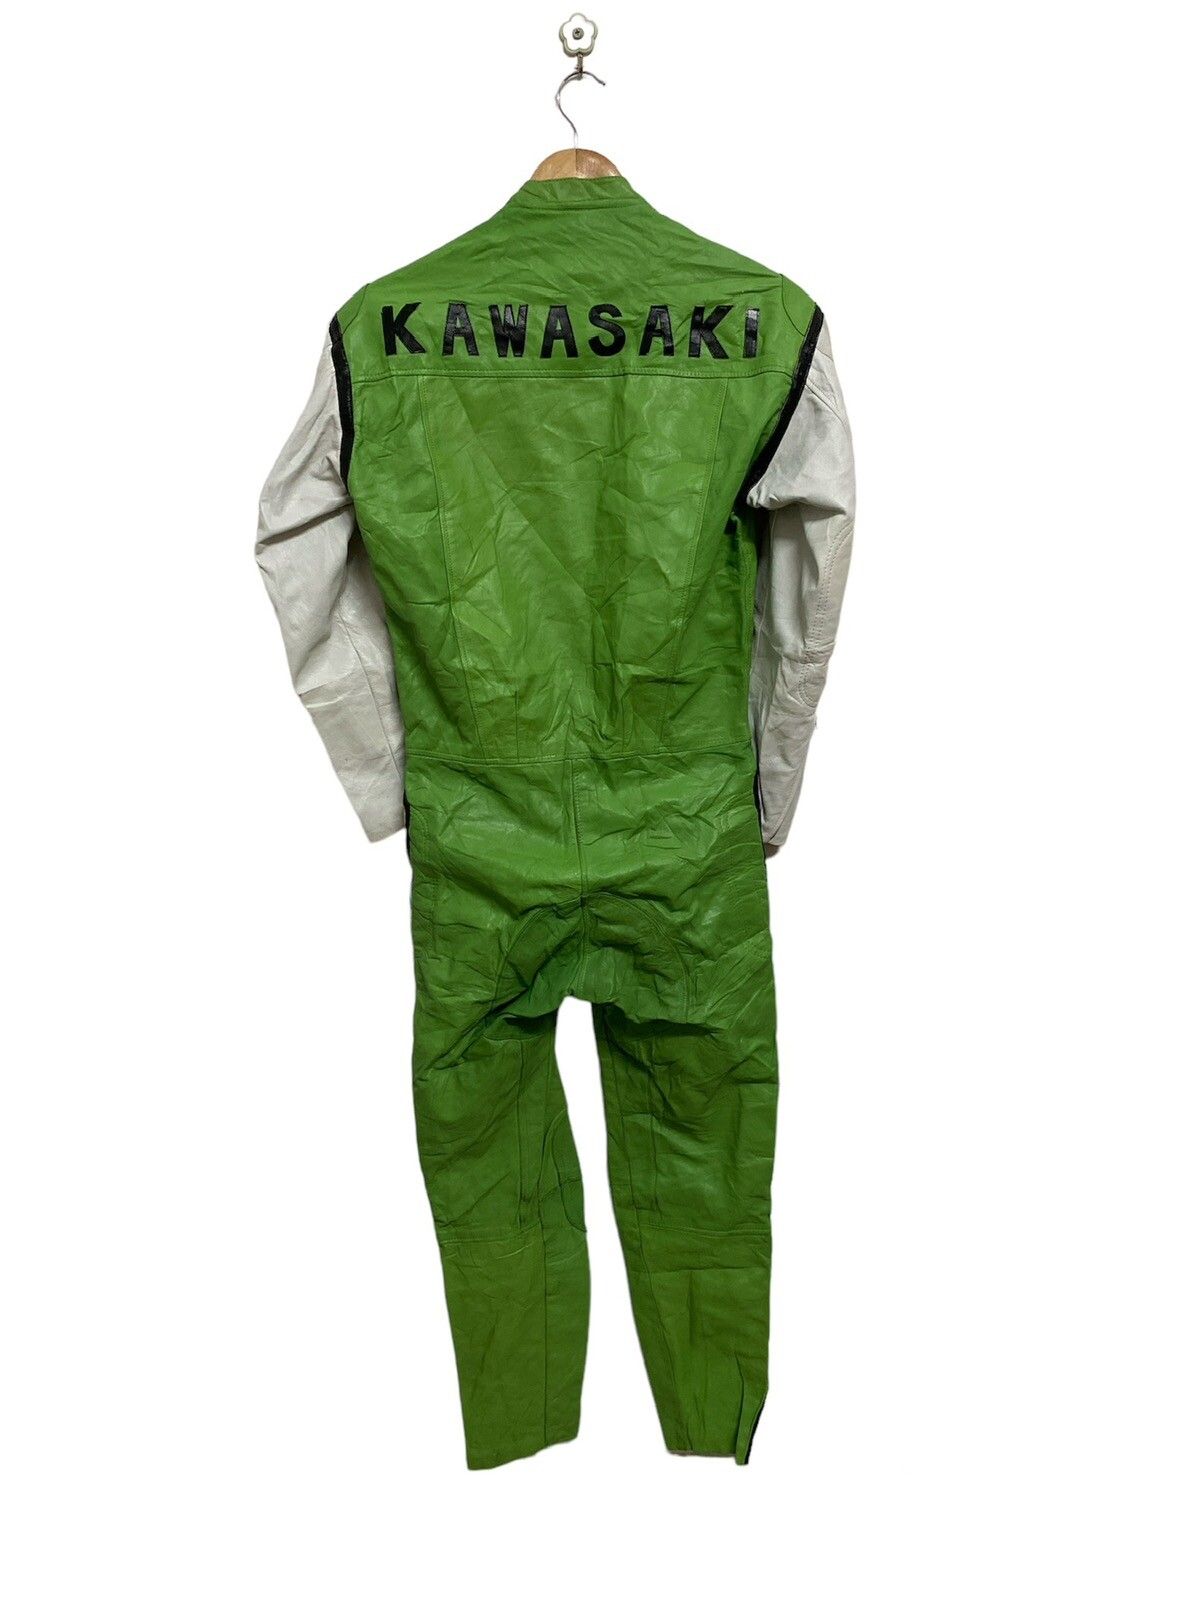 Sports Specialties - KAWASAKI Leather Racing Suit Overall - 9